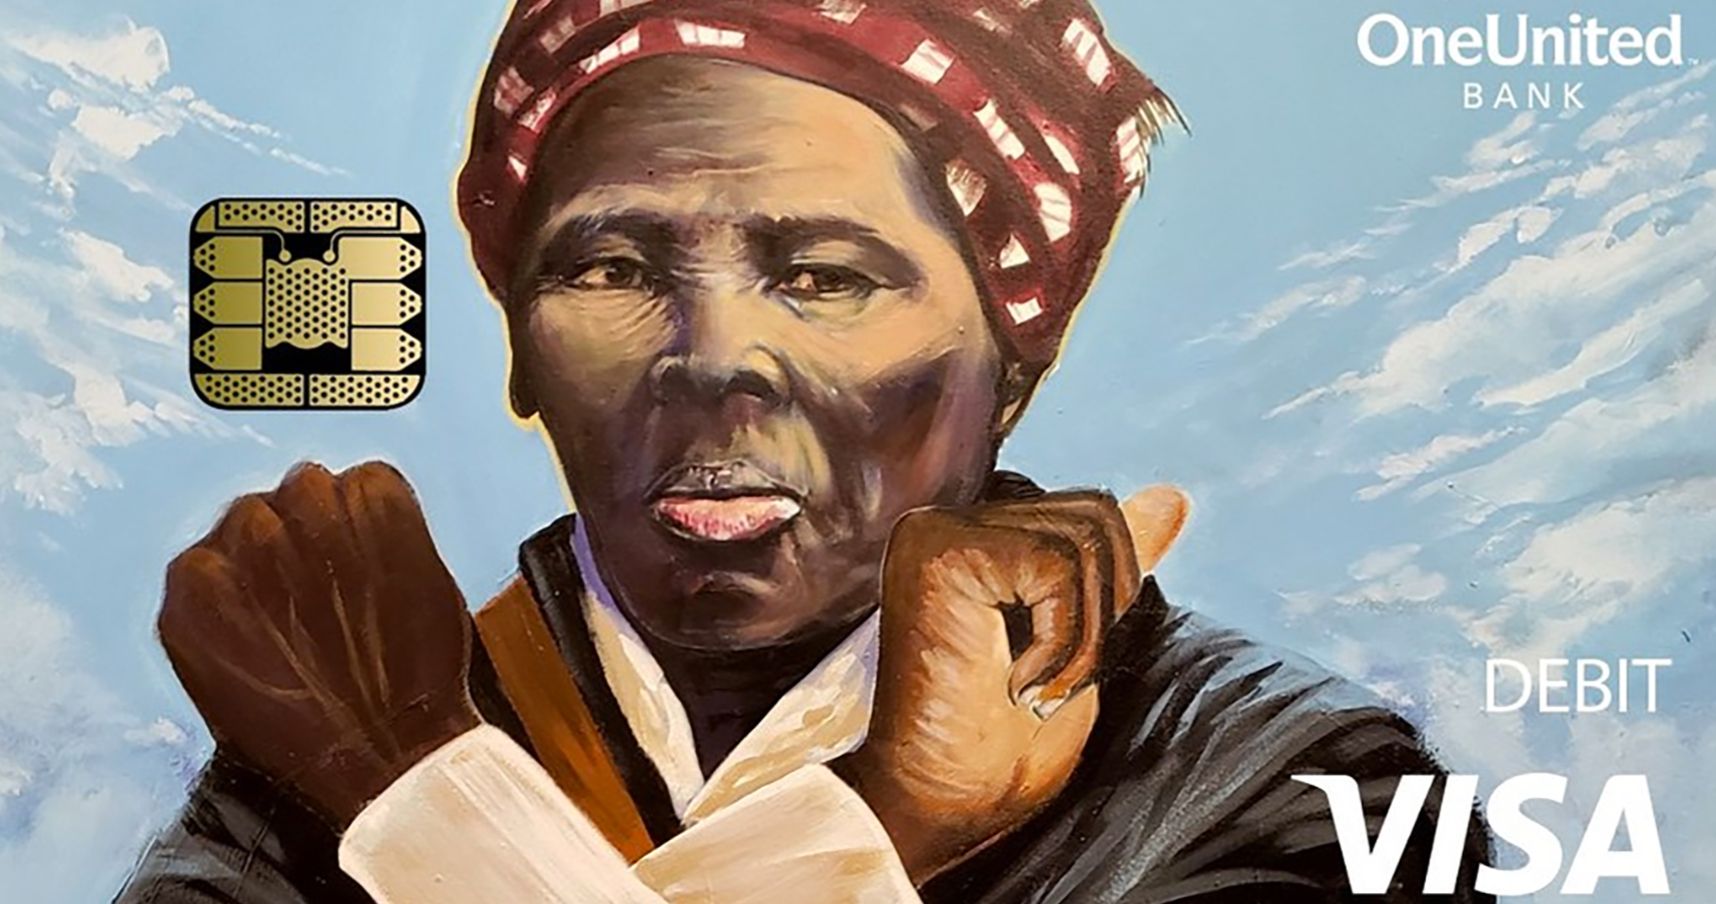 Is Harriet Tubman Really Striking a Wakanda Forever Pose on This Bank Card?